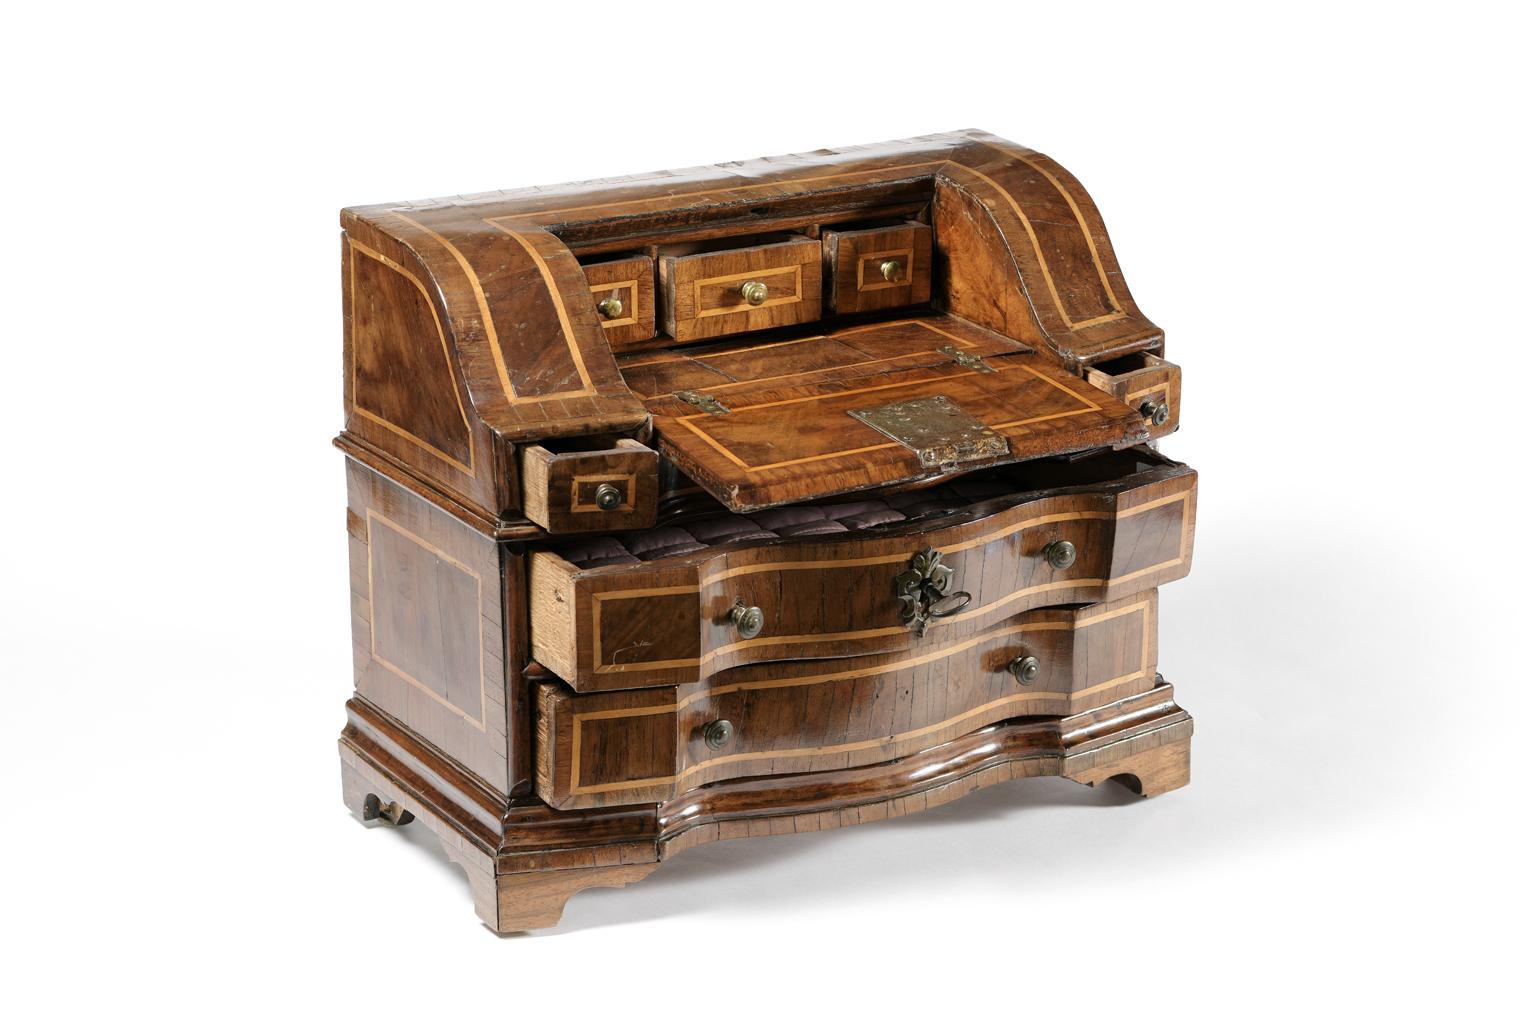 Miniature model of a chest of drawers with flap
Verona, middle of the 18th century 
It measures 13.77 in x 17.32 in x 9.05 in (35 cm x 44 cm x 23 cm)
lb 12.12 (kg 5.5)
State of conservation: Good, some signs of use.

This model faithfully reproduces